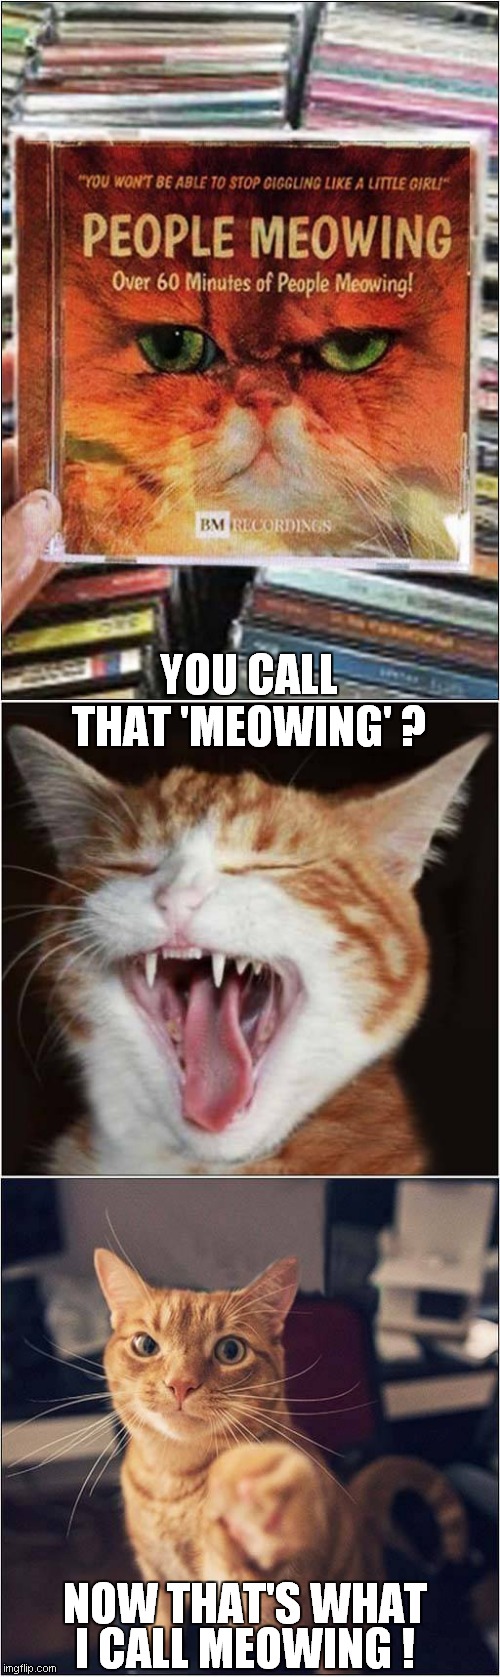 Now That's Meowing | YOU CALL THAT 'MEOWING' ? NOW THAT'S WHAT; I CALL MEOWING ! | image tagged in cats,fun,meow,singing | made w/ Imgflip meme maker